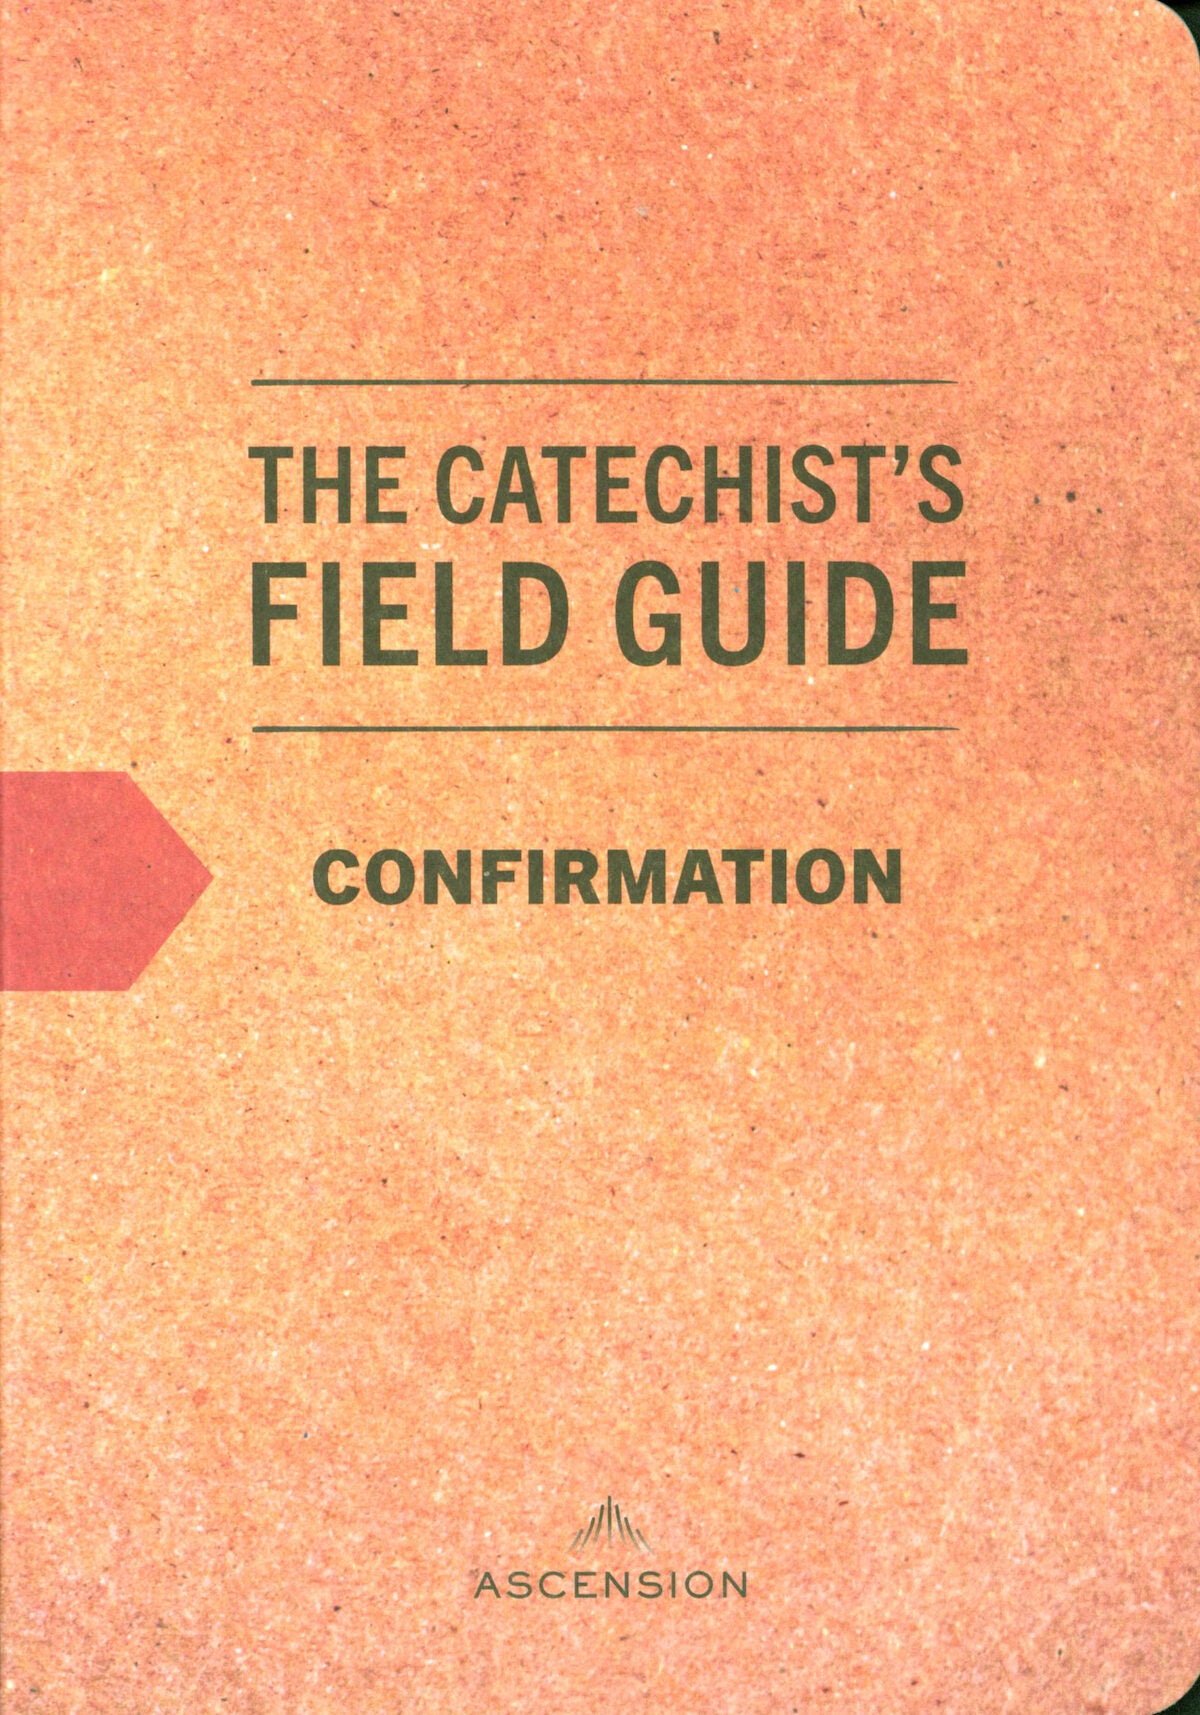 Catechist's Field Guide - Confirmation